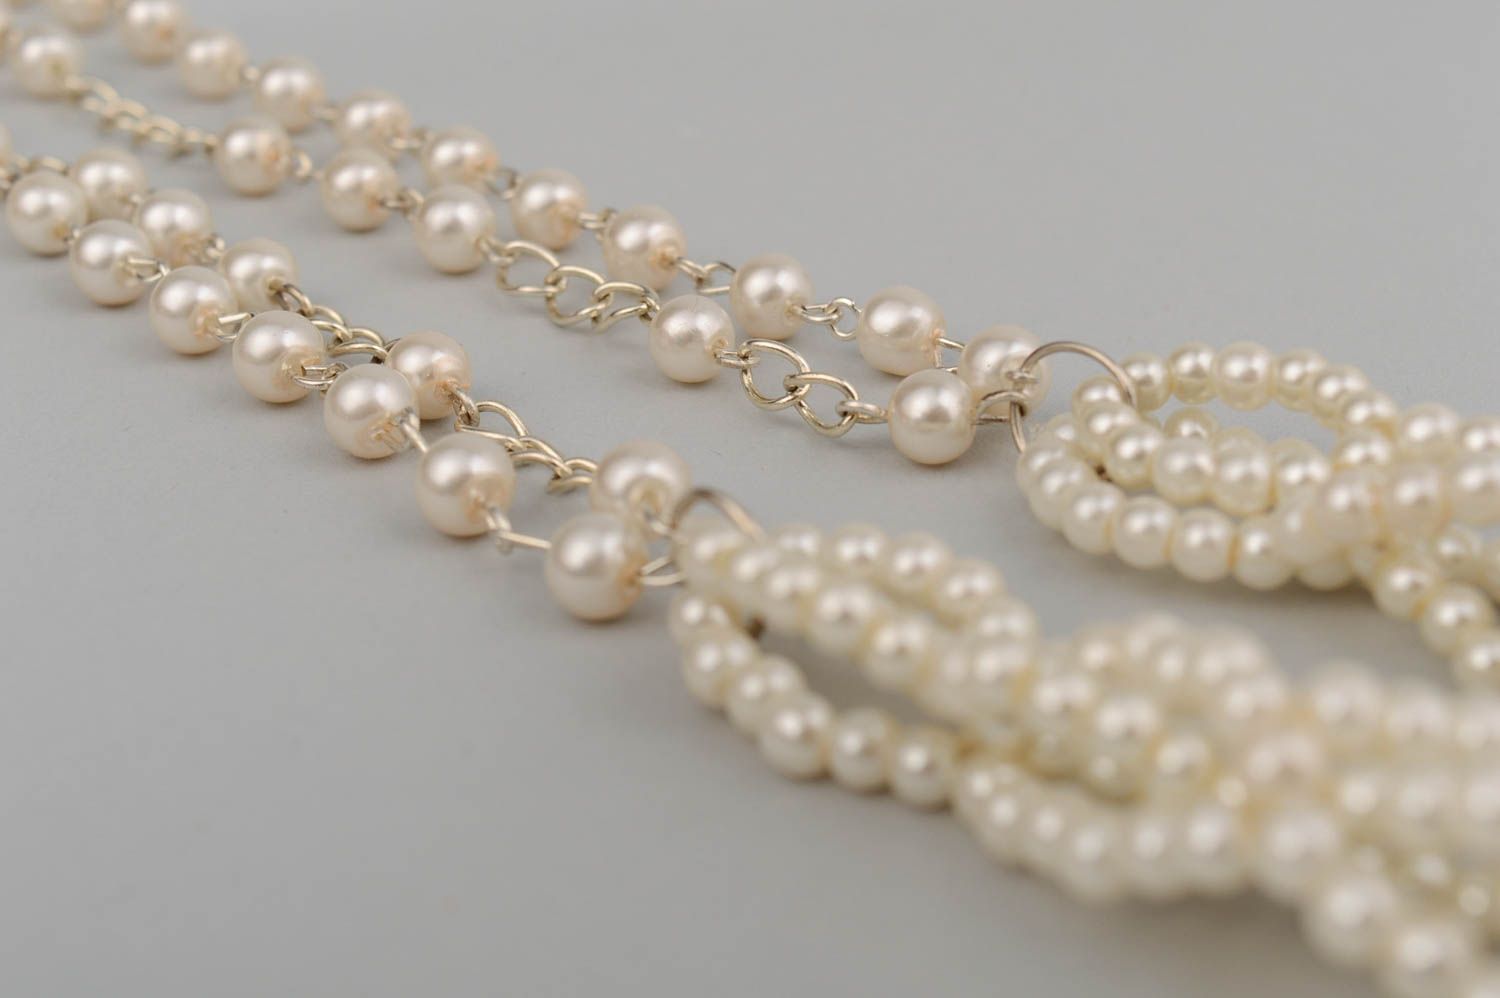 Handmade decorative white ceramic pearl beads necklace long fancy accessory photo 4